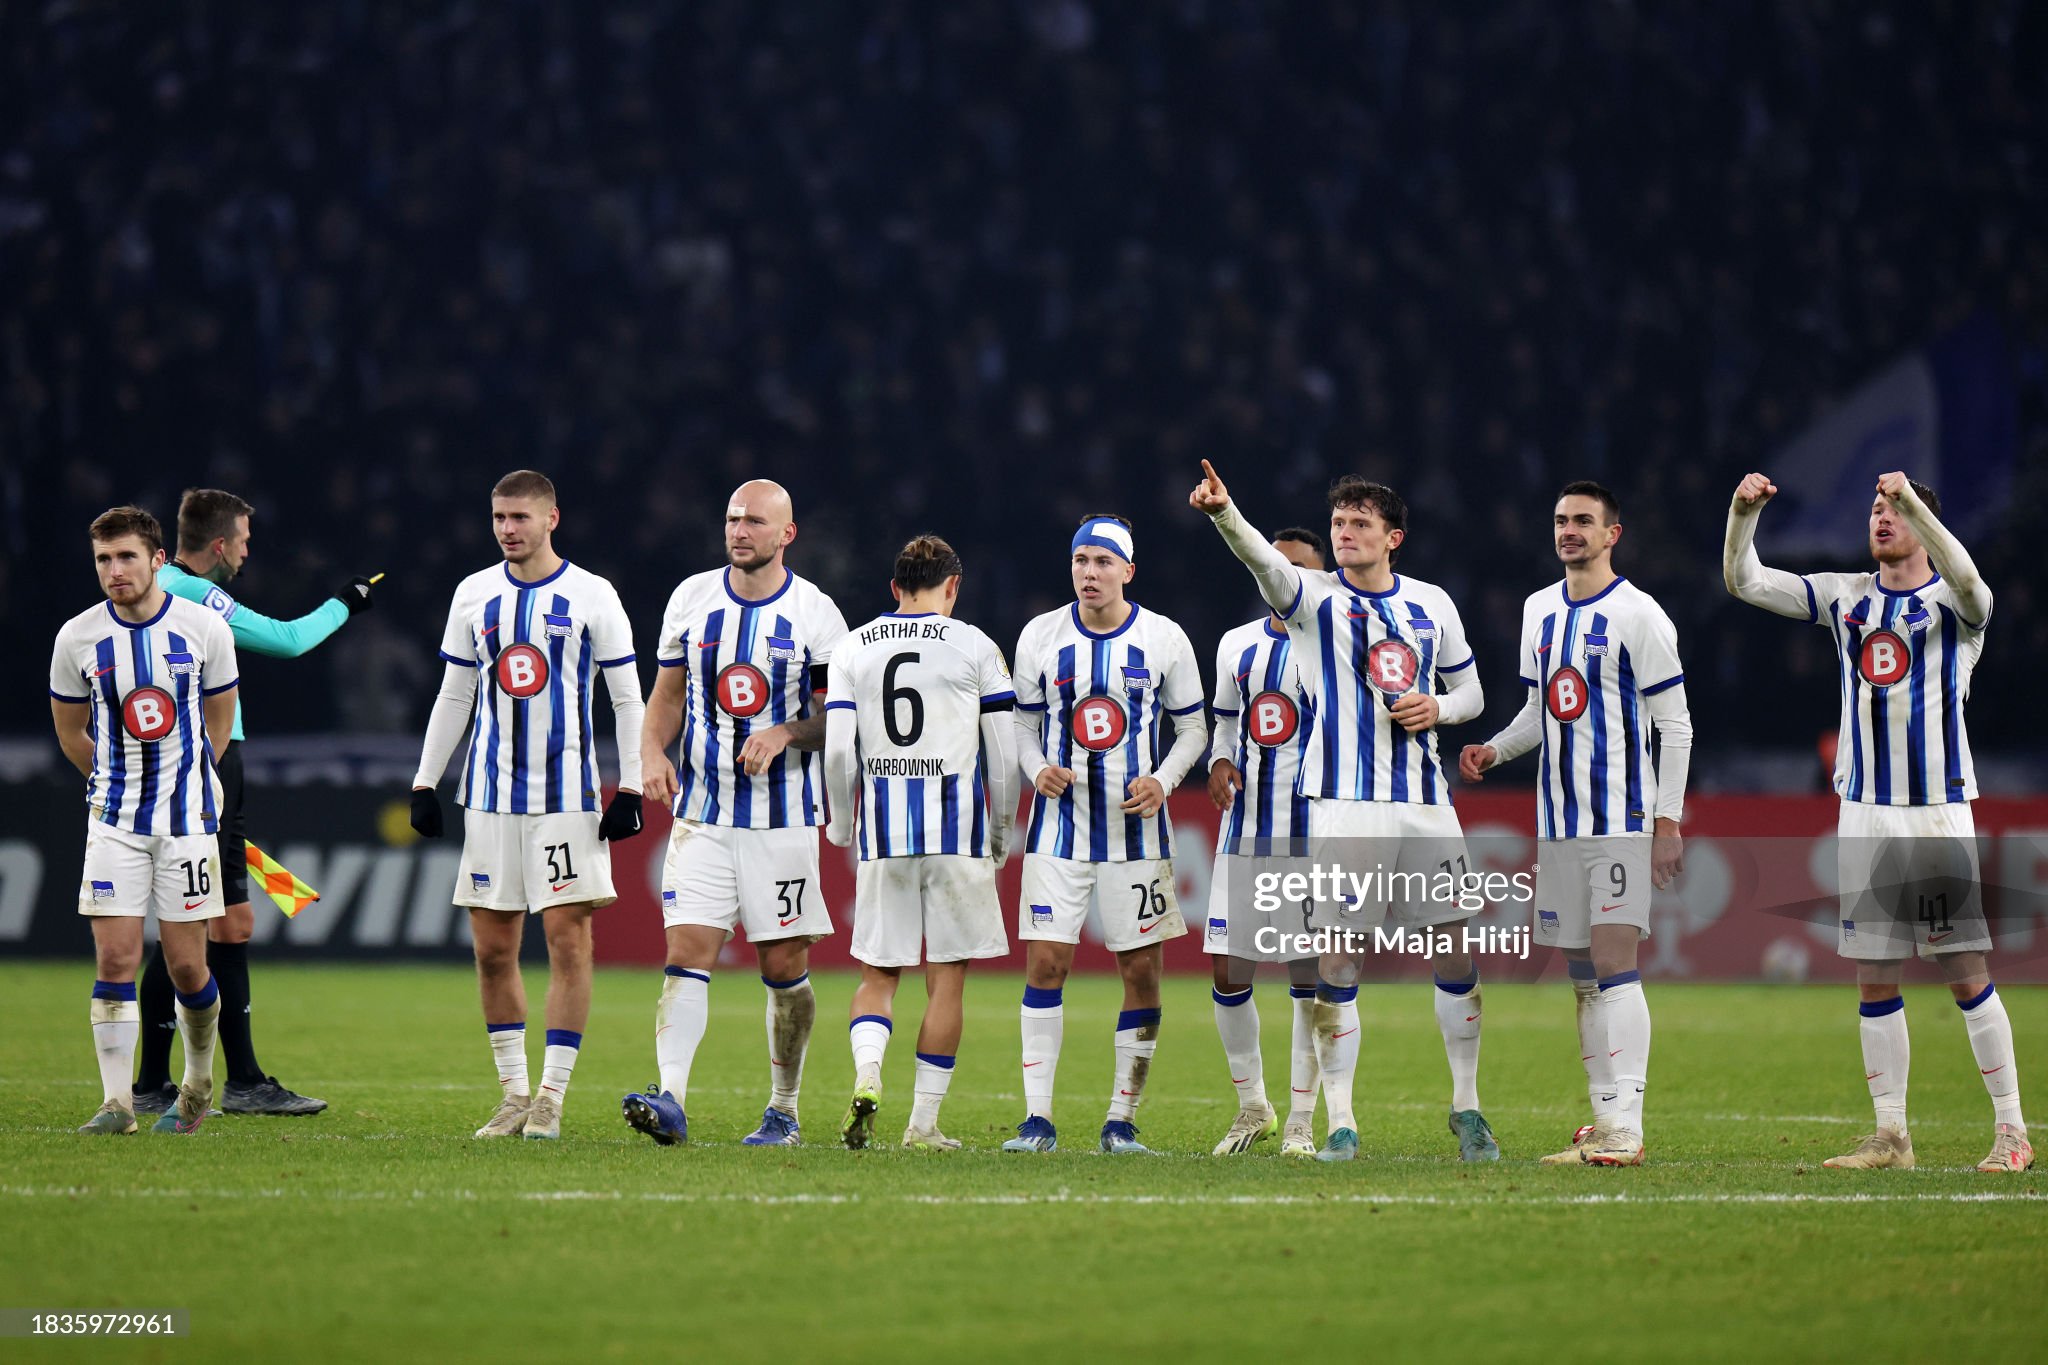 Vlogger with millions of followers helps Hertha reach the quarterfinals of the cup